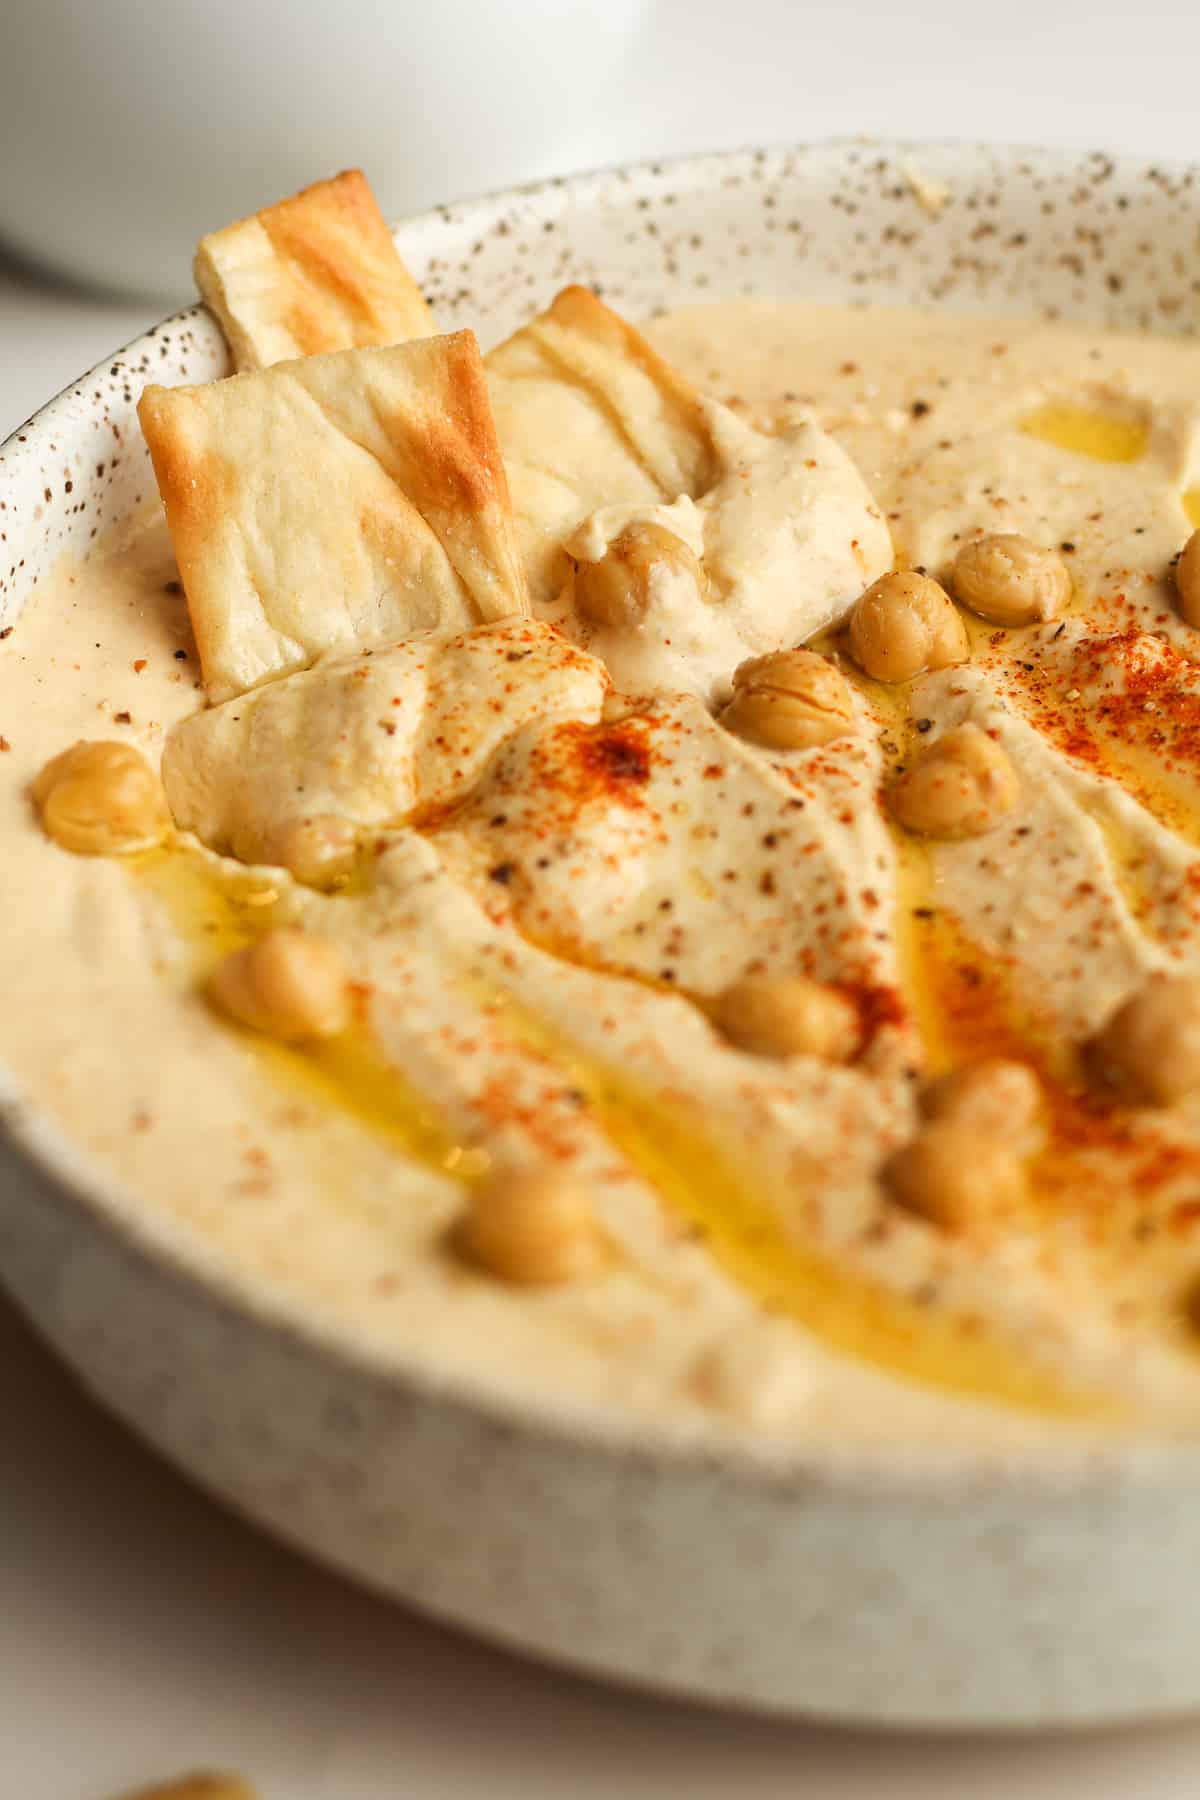 Side shot of a bowl of creamy hummus, with pita chips.